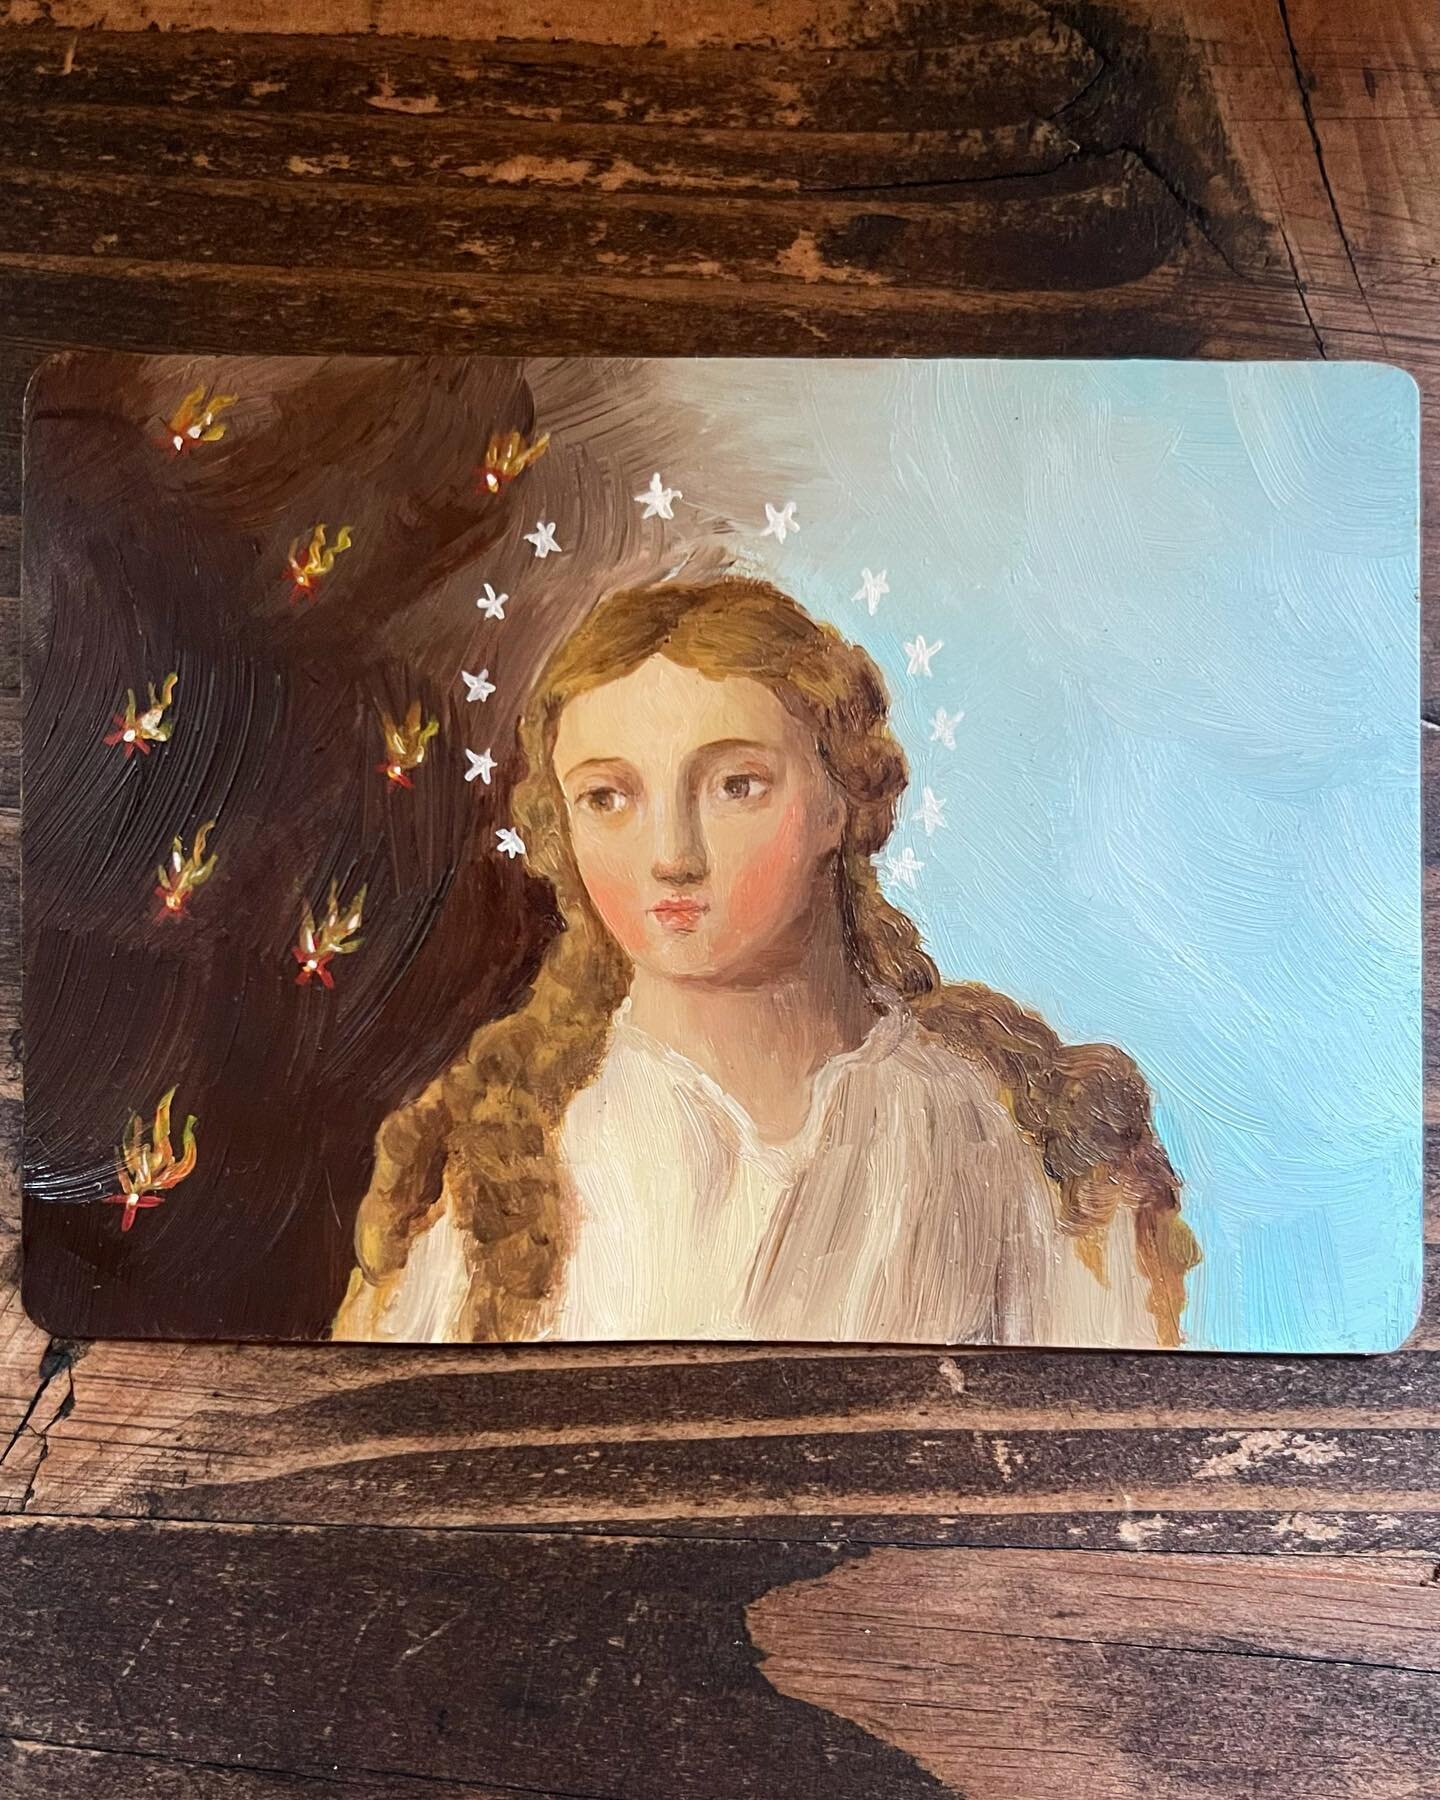 Virgin of the Apocalypse 

Oil on copper
10.5 cm x 7.5 cm

My first oil painting! Very excited to get more into this medium and experiment with different surfaces. This painting is only a smidge bigger than a credit card.